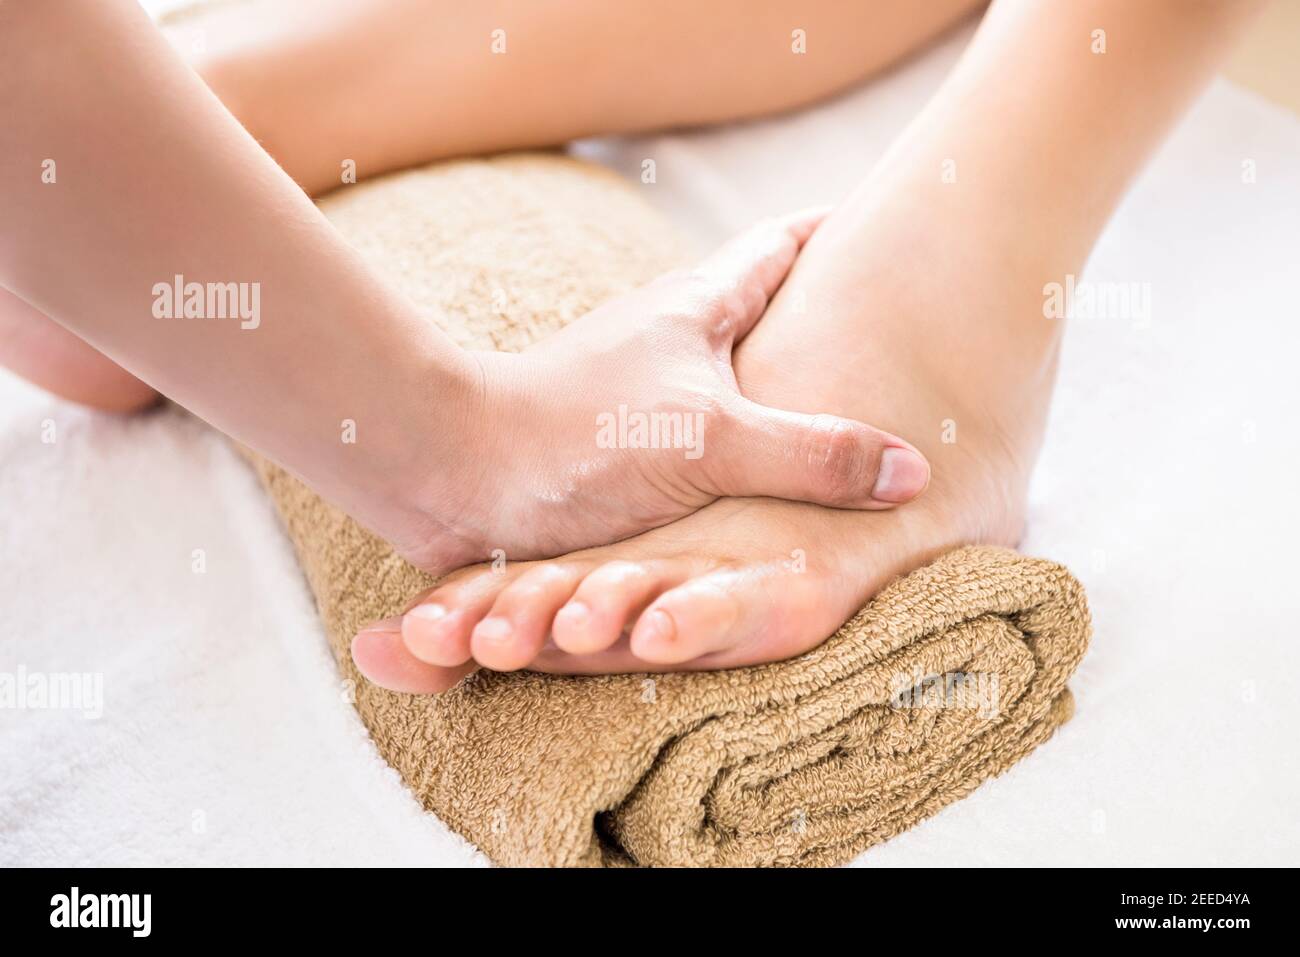 Professional therapist giving relaxing reflexology foot massage treatment to a woman in spa Stock Photo